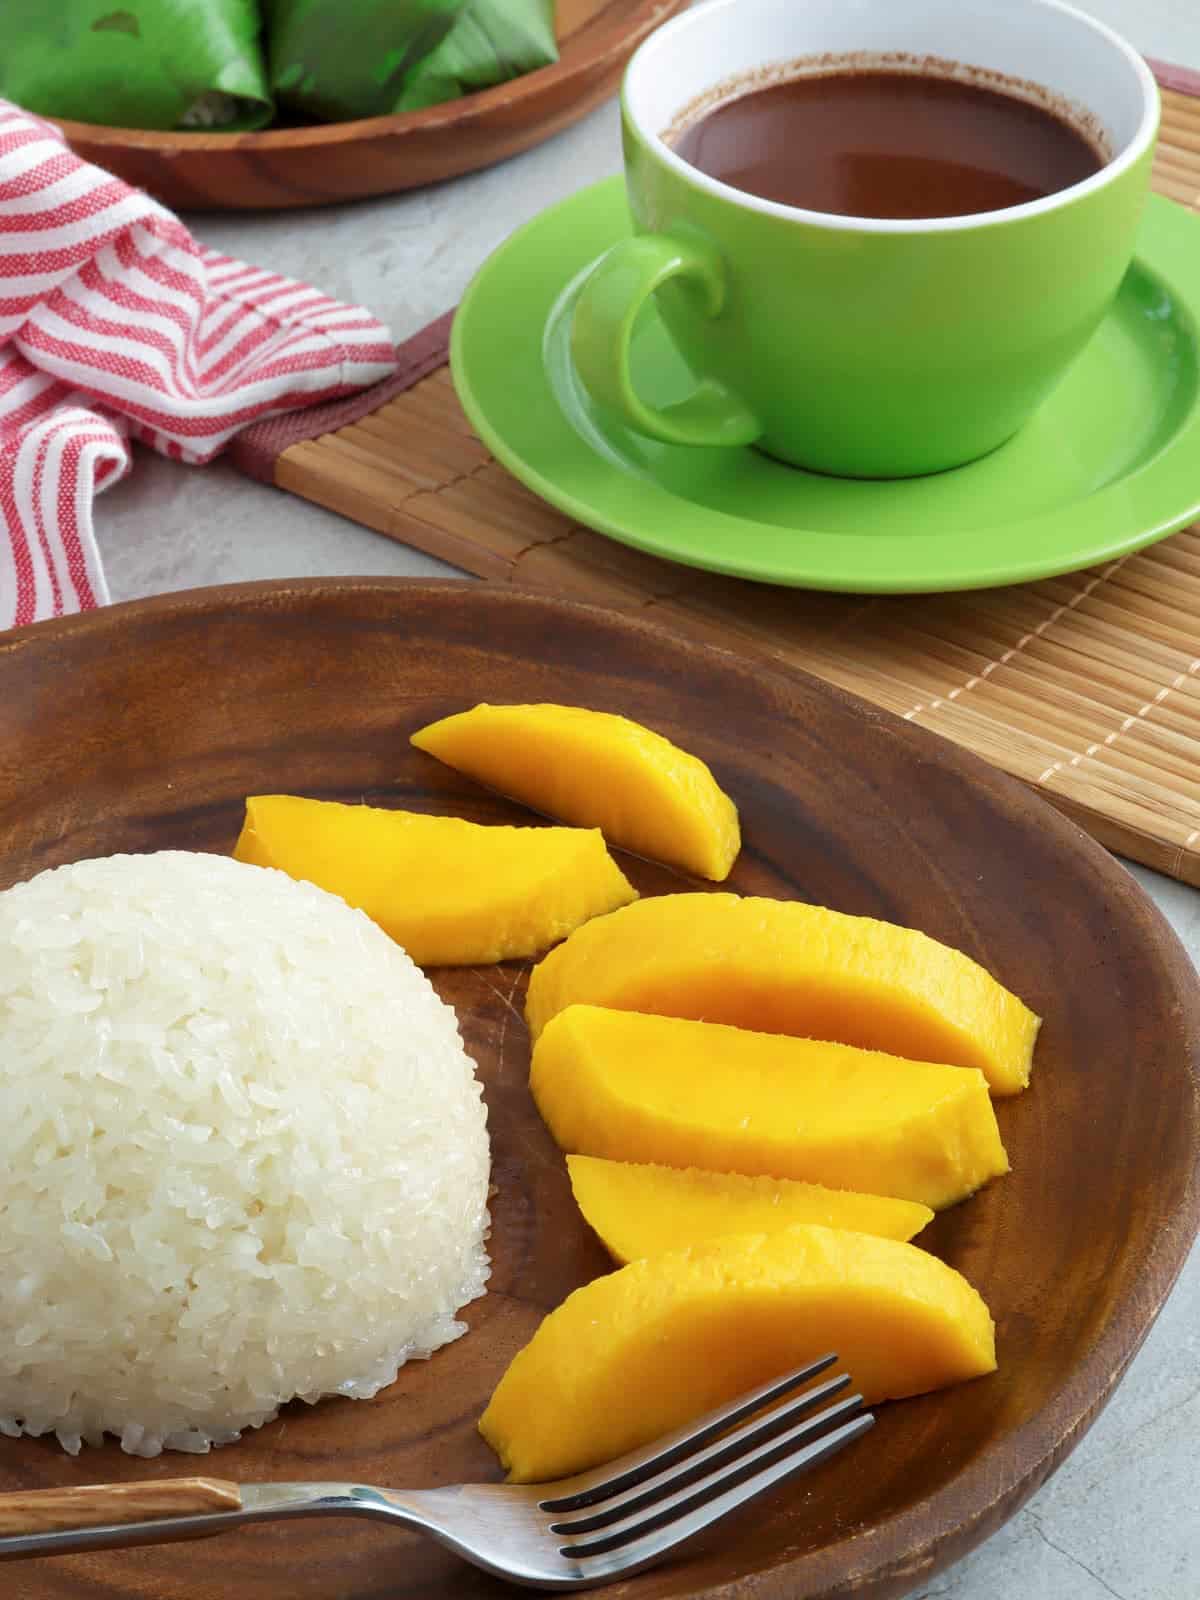 puto maya, sliced mangoes on a wooden plate with a cup of hot chocolate on the side